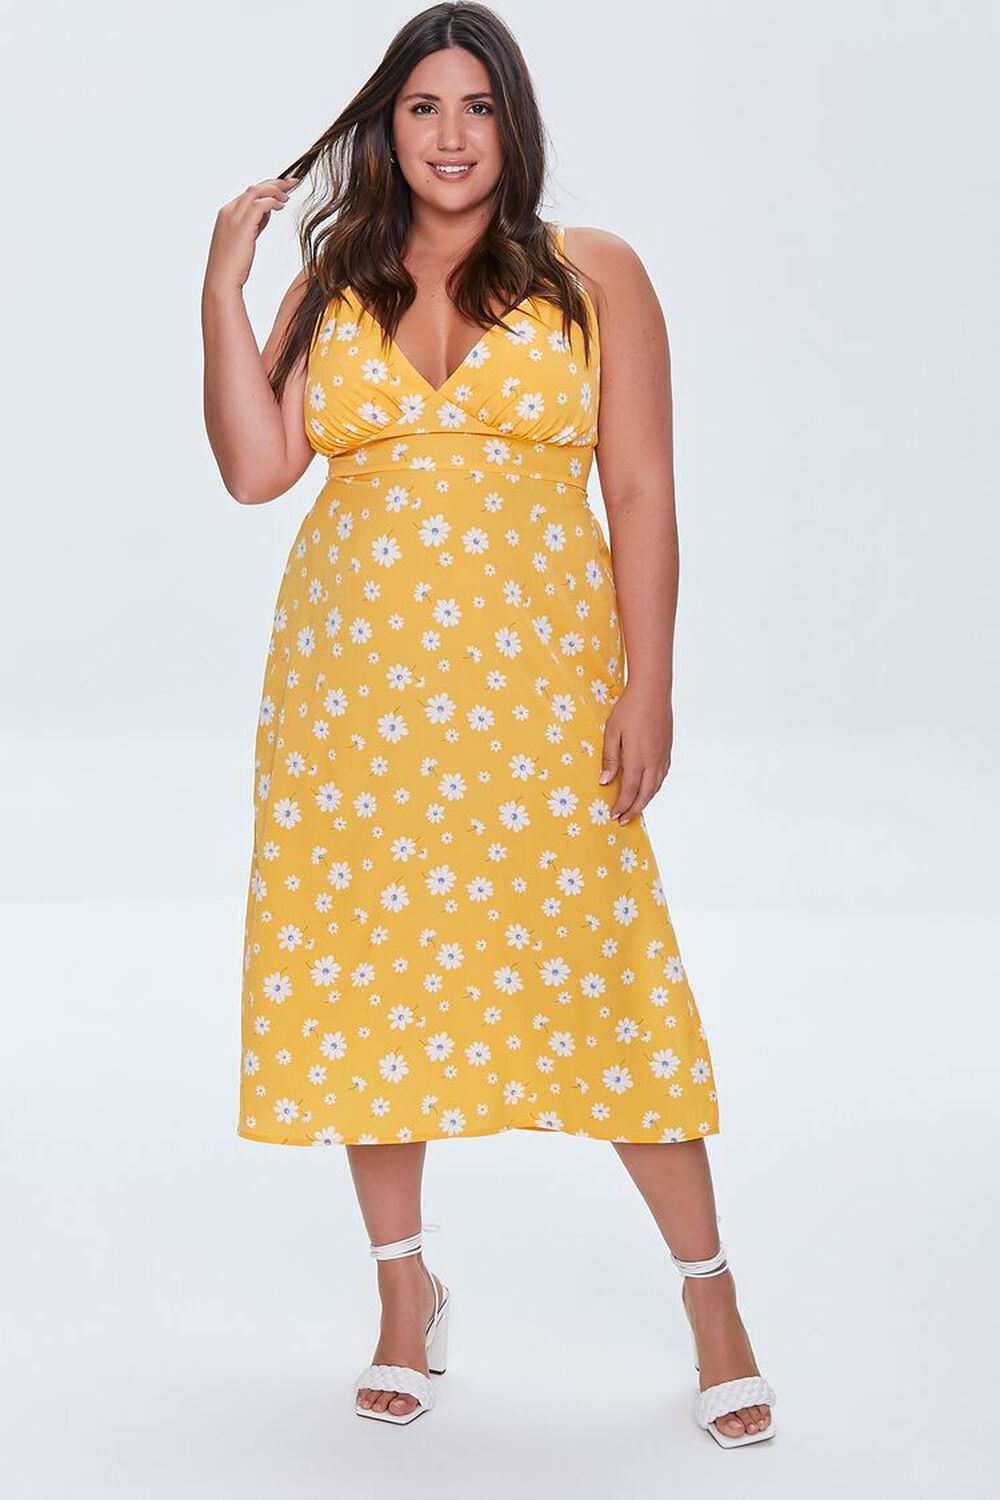 YELLOW/MULTI Plus Size Daisy Floral Cami Dress, image 1